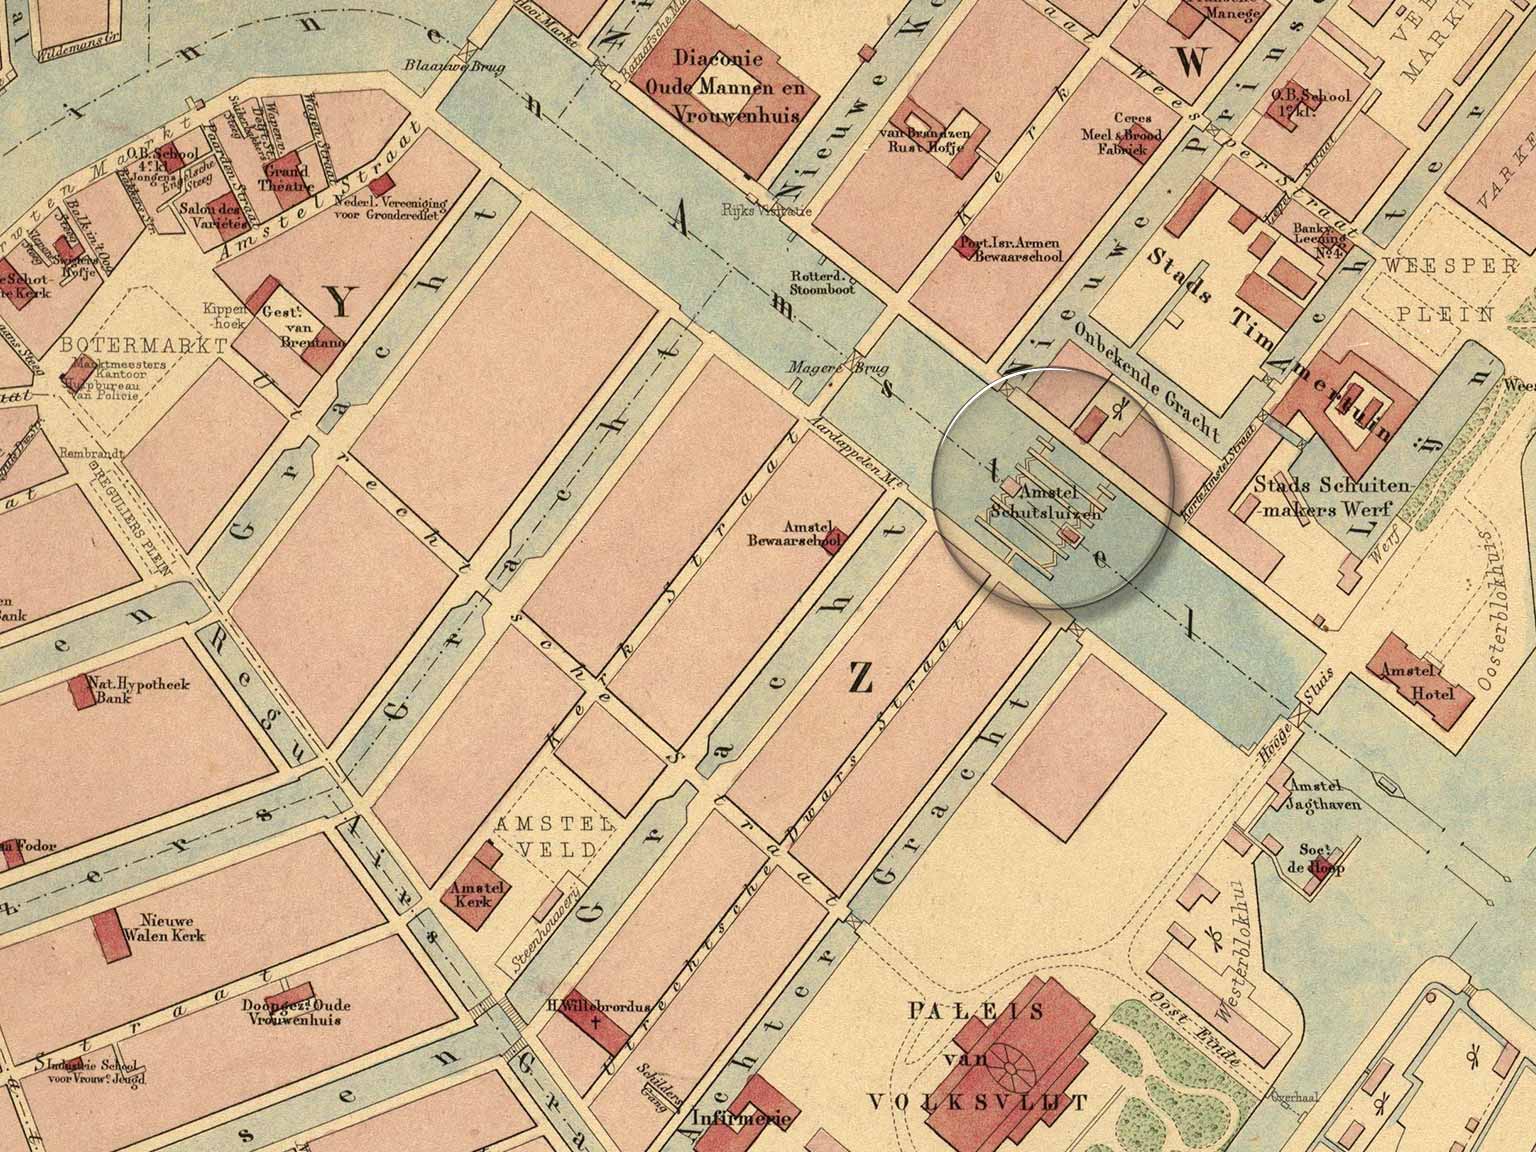 Amstel Locks, Amsterdam, on a map from 1882